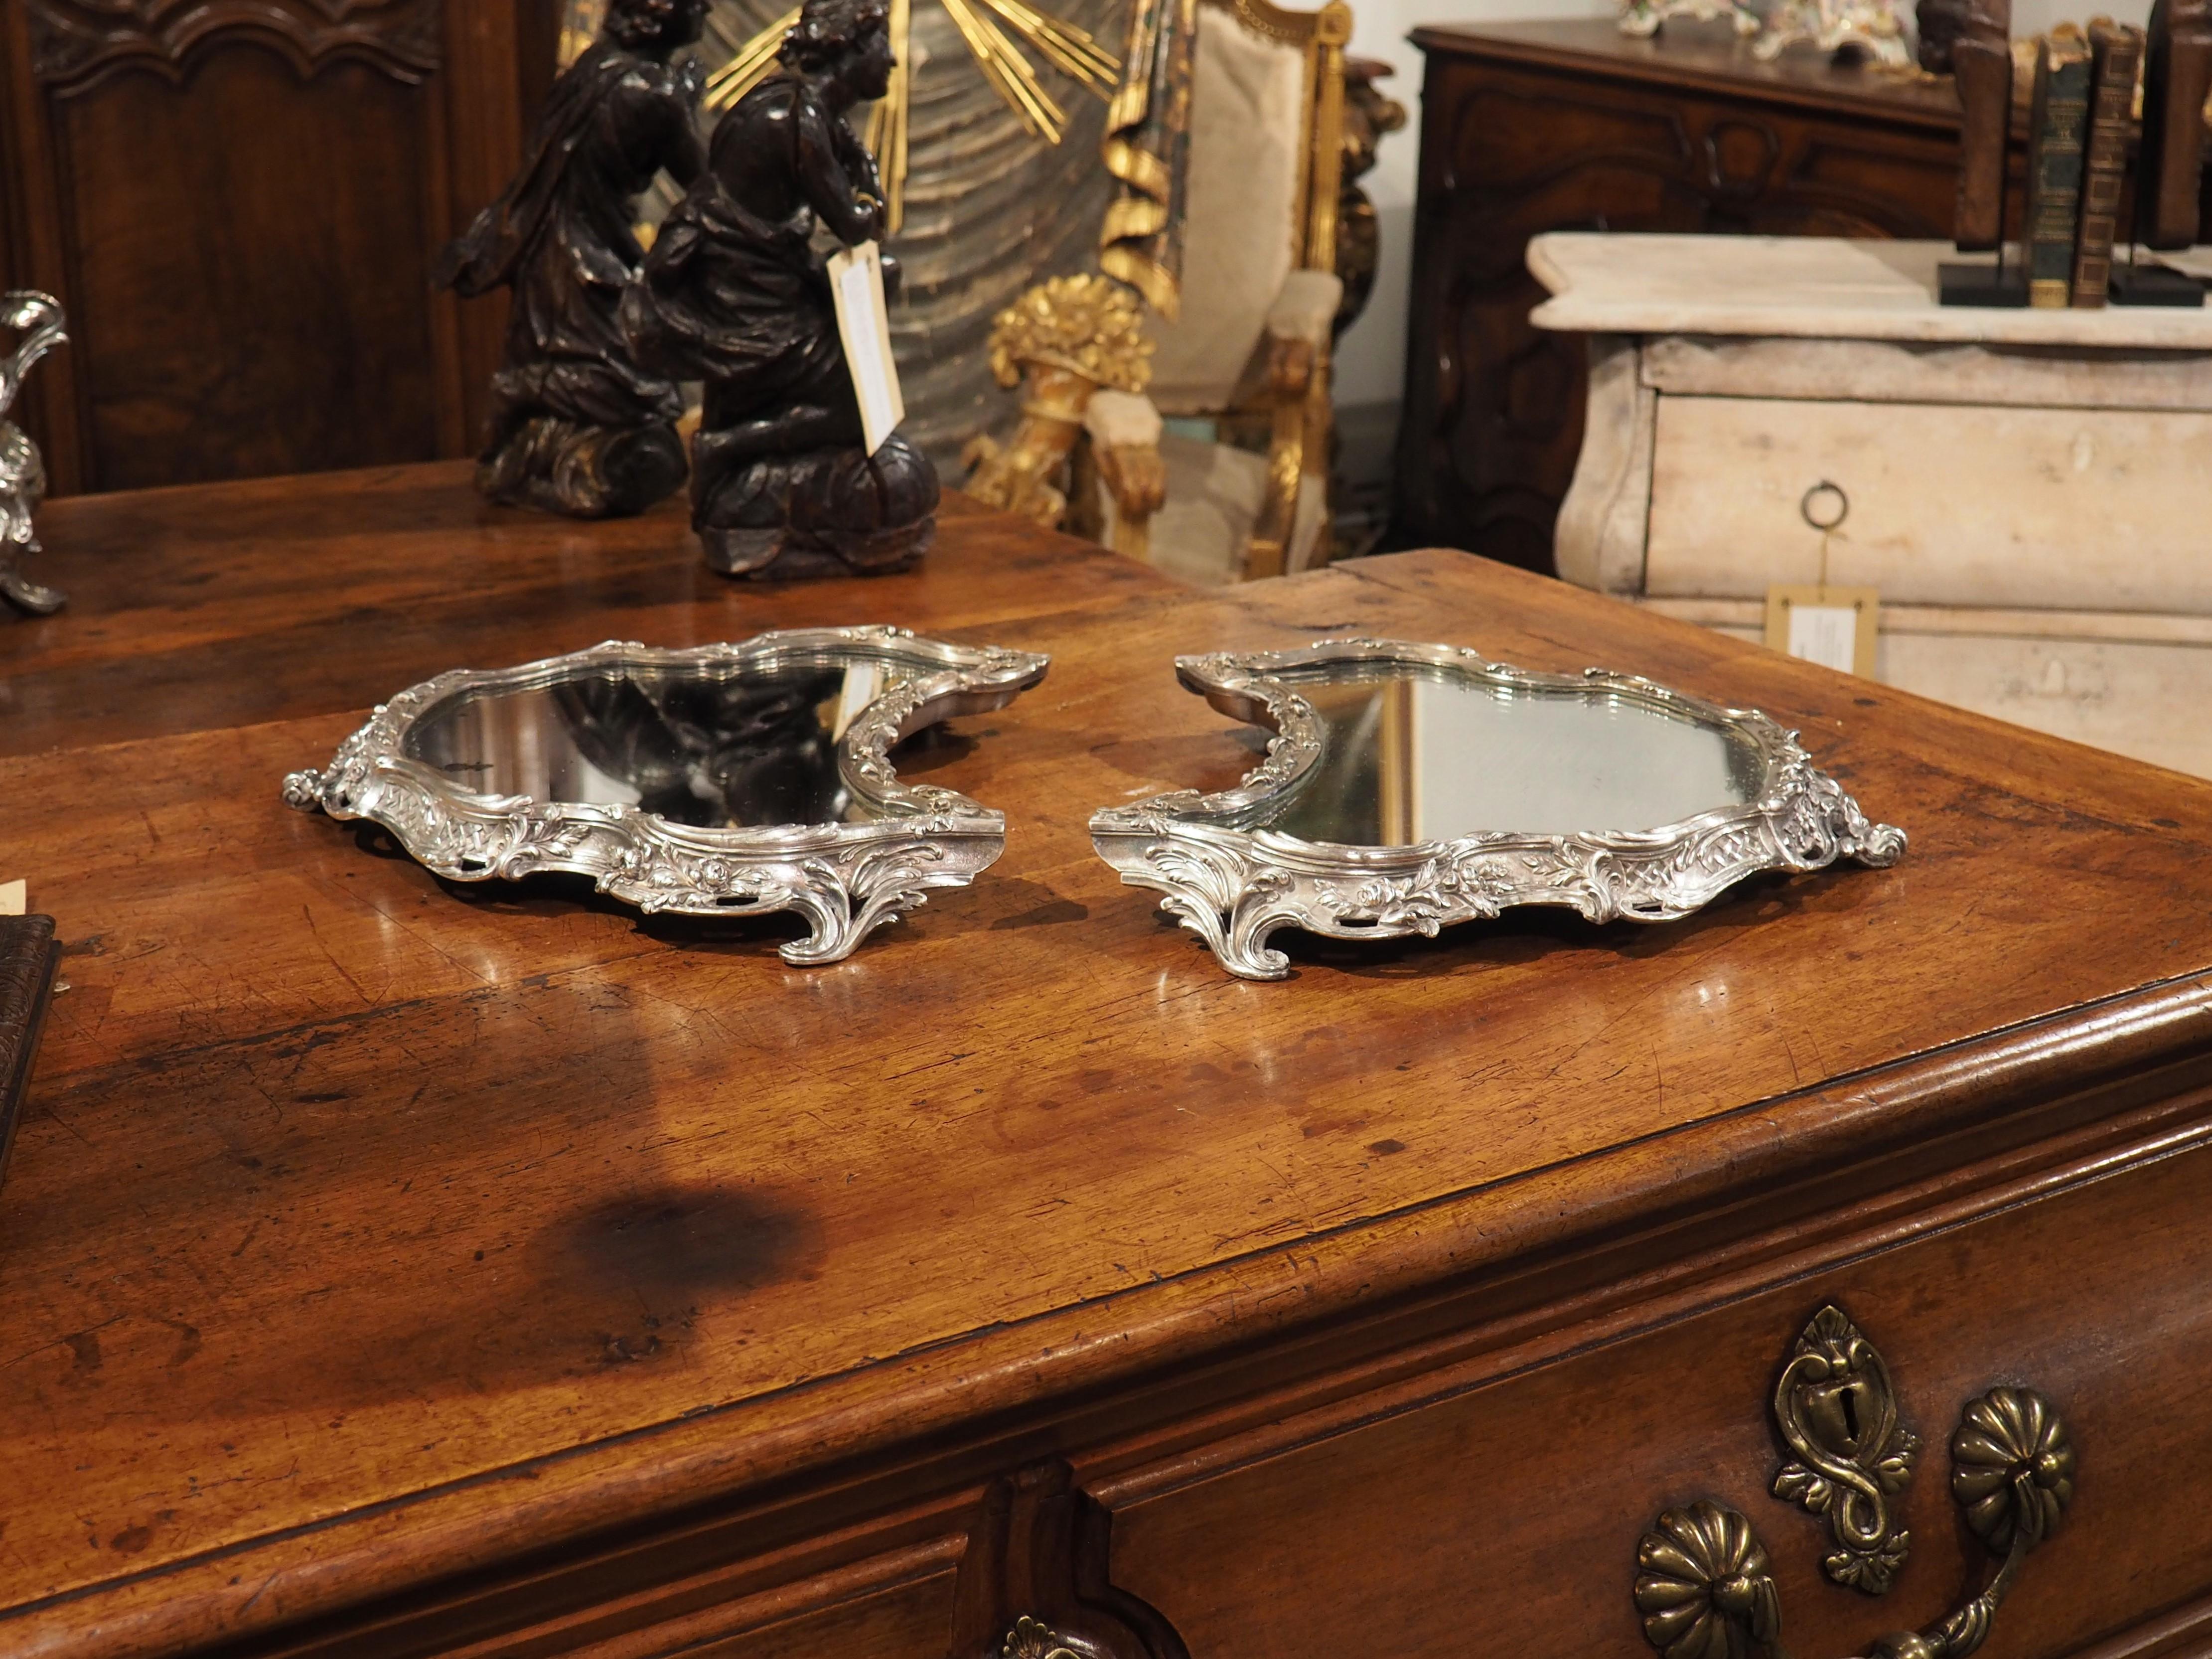 Step into the world of exquisite 19th-century France with a 2-piece silvered bronze surtout de table. These magnificent pieces come adorned with highly shaped mirrors and are surrounded by intricate floral and foliate motifs. The craftsmanship in